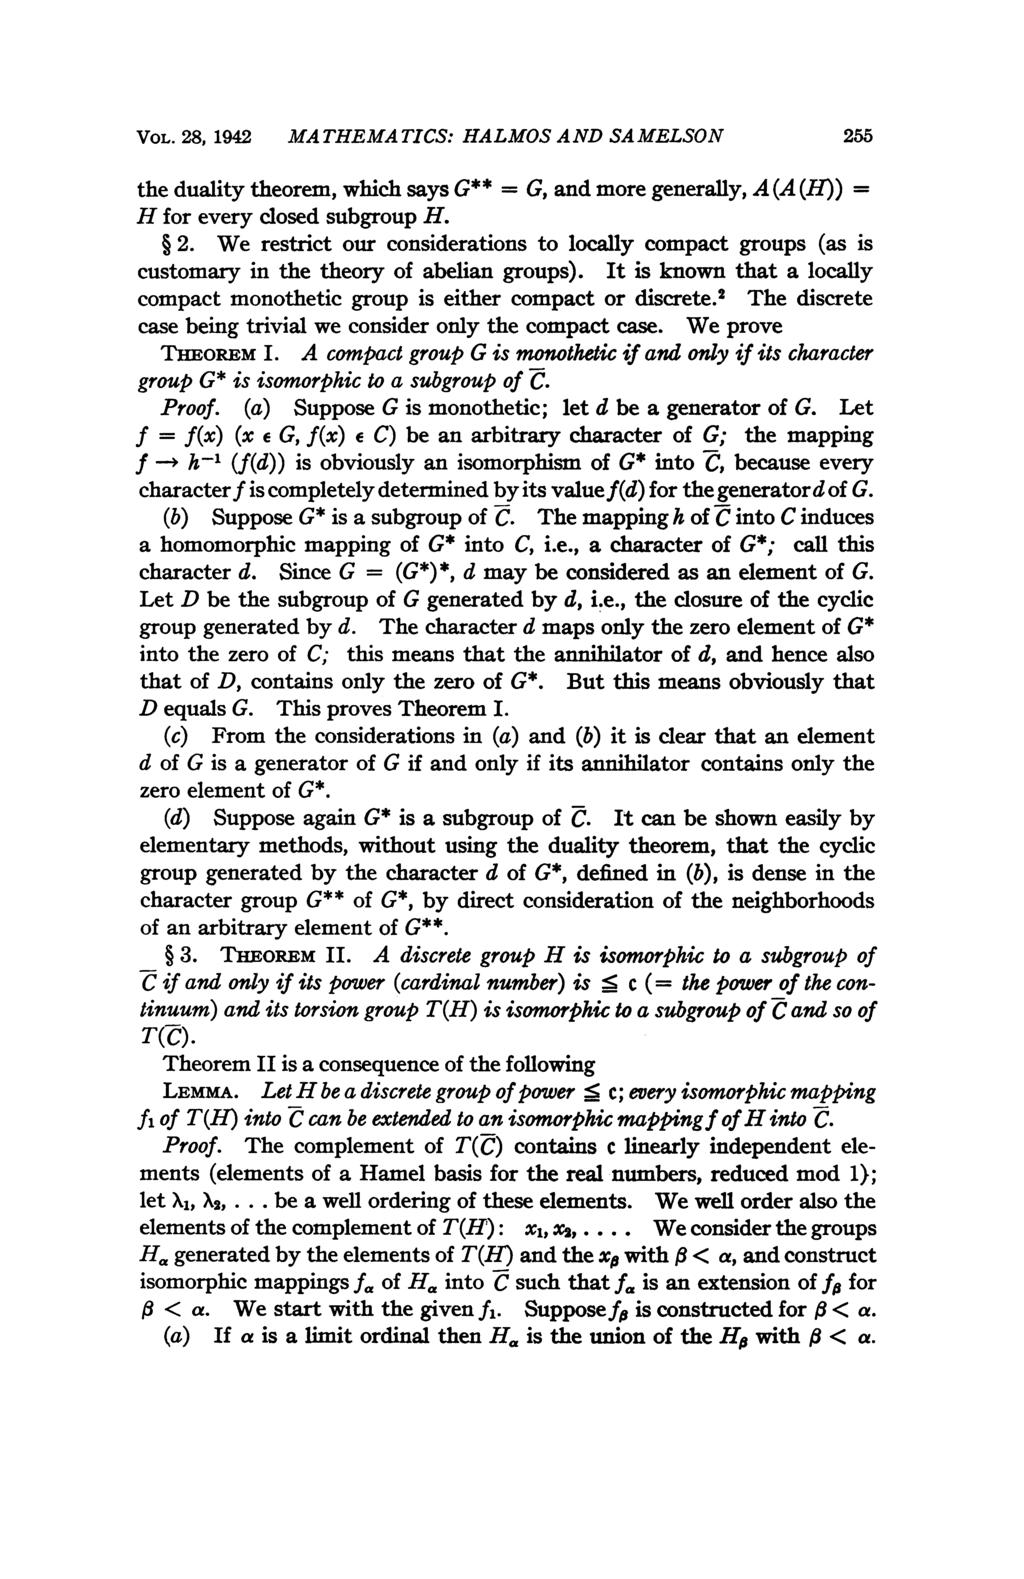 VOL. 28, 1942 MATHEMATICS: HALMOS AND SAMELSON 255 the duality theorem, which says G** G, and more generally, A (A (H)) = H for every closed subgroup H. 2. We restrict our considerations to locally compact groups (as is customary in the theory of abelian groups).